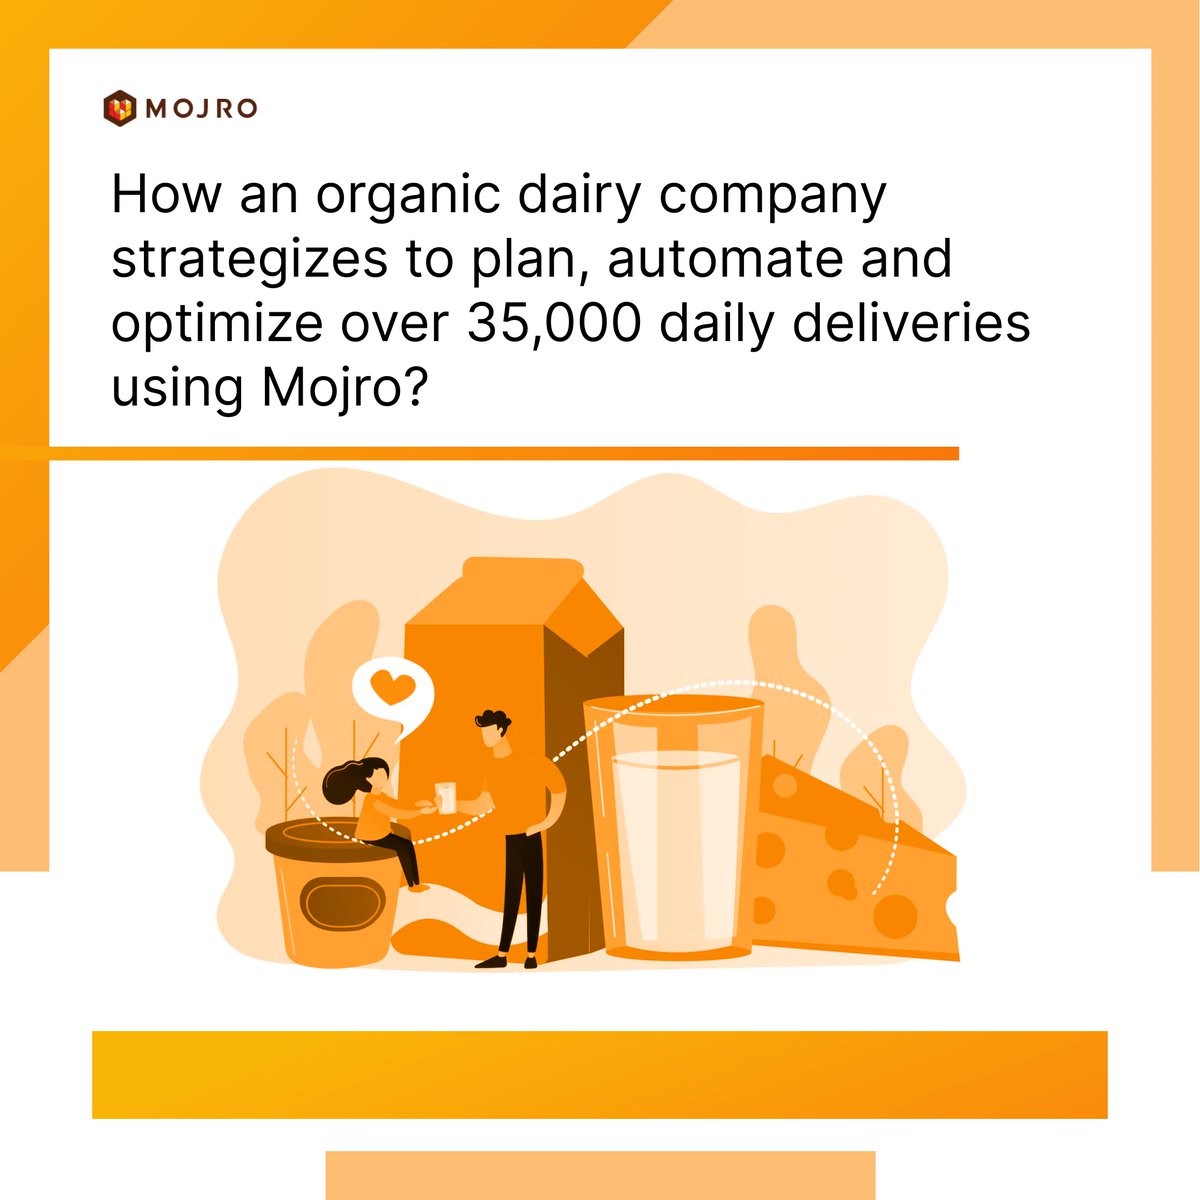 Visit the link below to download the case study of one of the leading direct-to-home delivery dairy companies, 
eu1.hubs.ly/H0460Gl0

#mojro #mojrotechnology #supplychain #logistics #dairy #monday  #dairyindustry